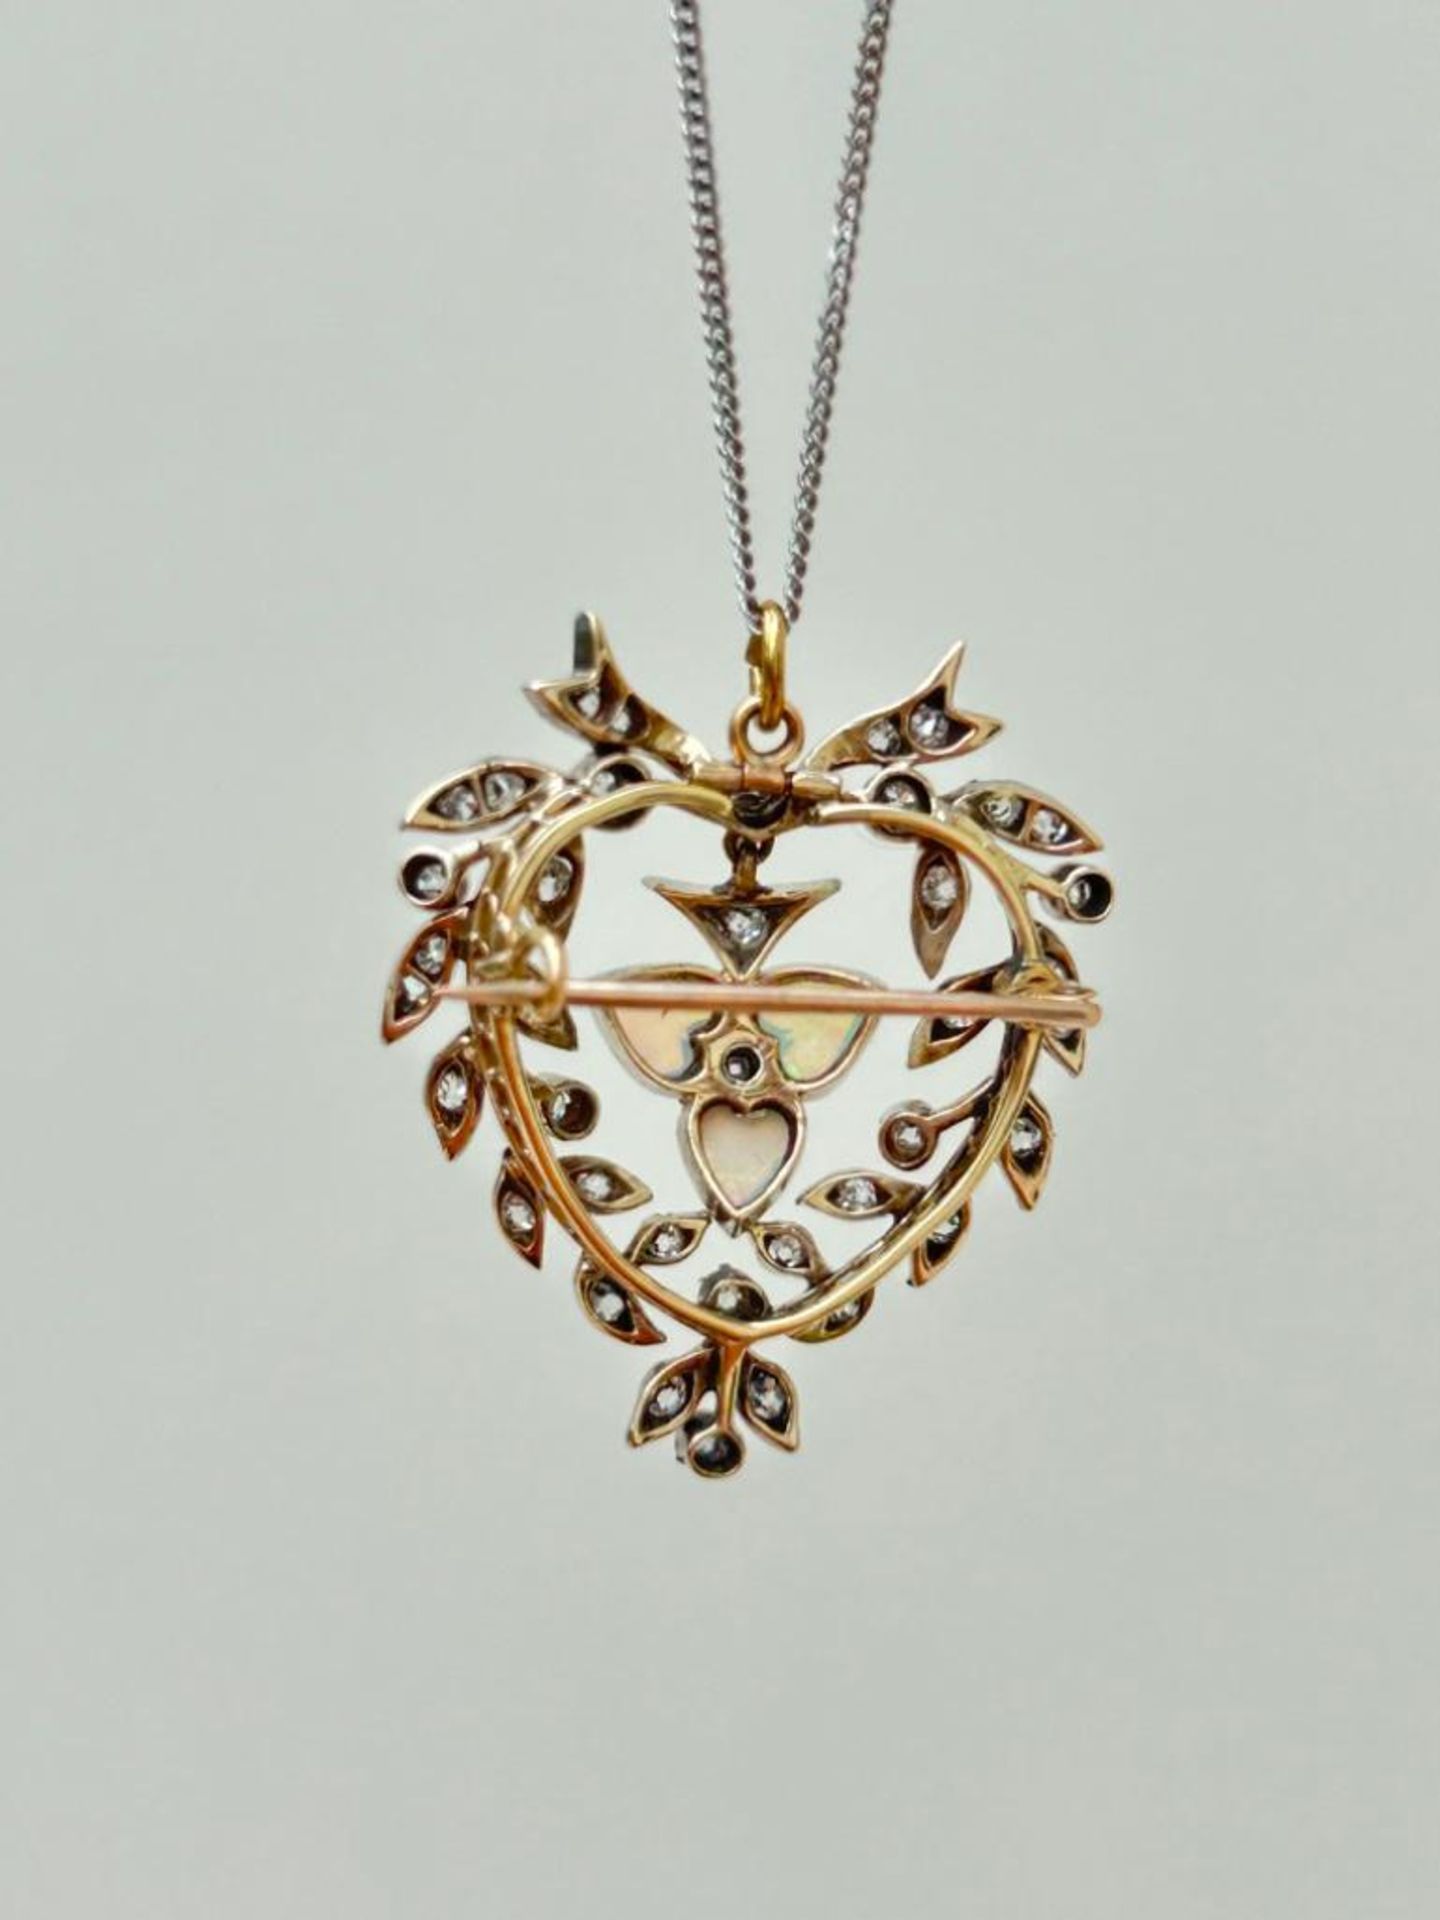 Incredible Antique Opal and Diamond Pendant on Platinum Chain in Original Fitted Box - Image 7 of 11